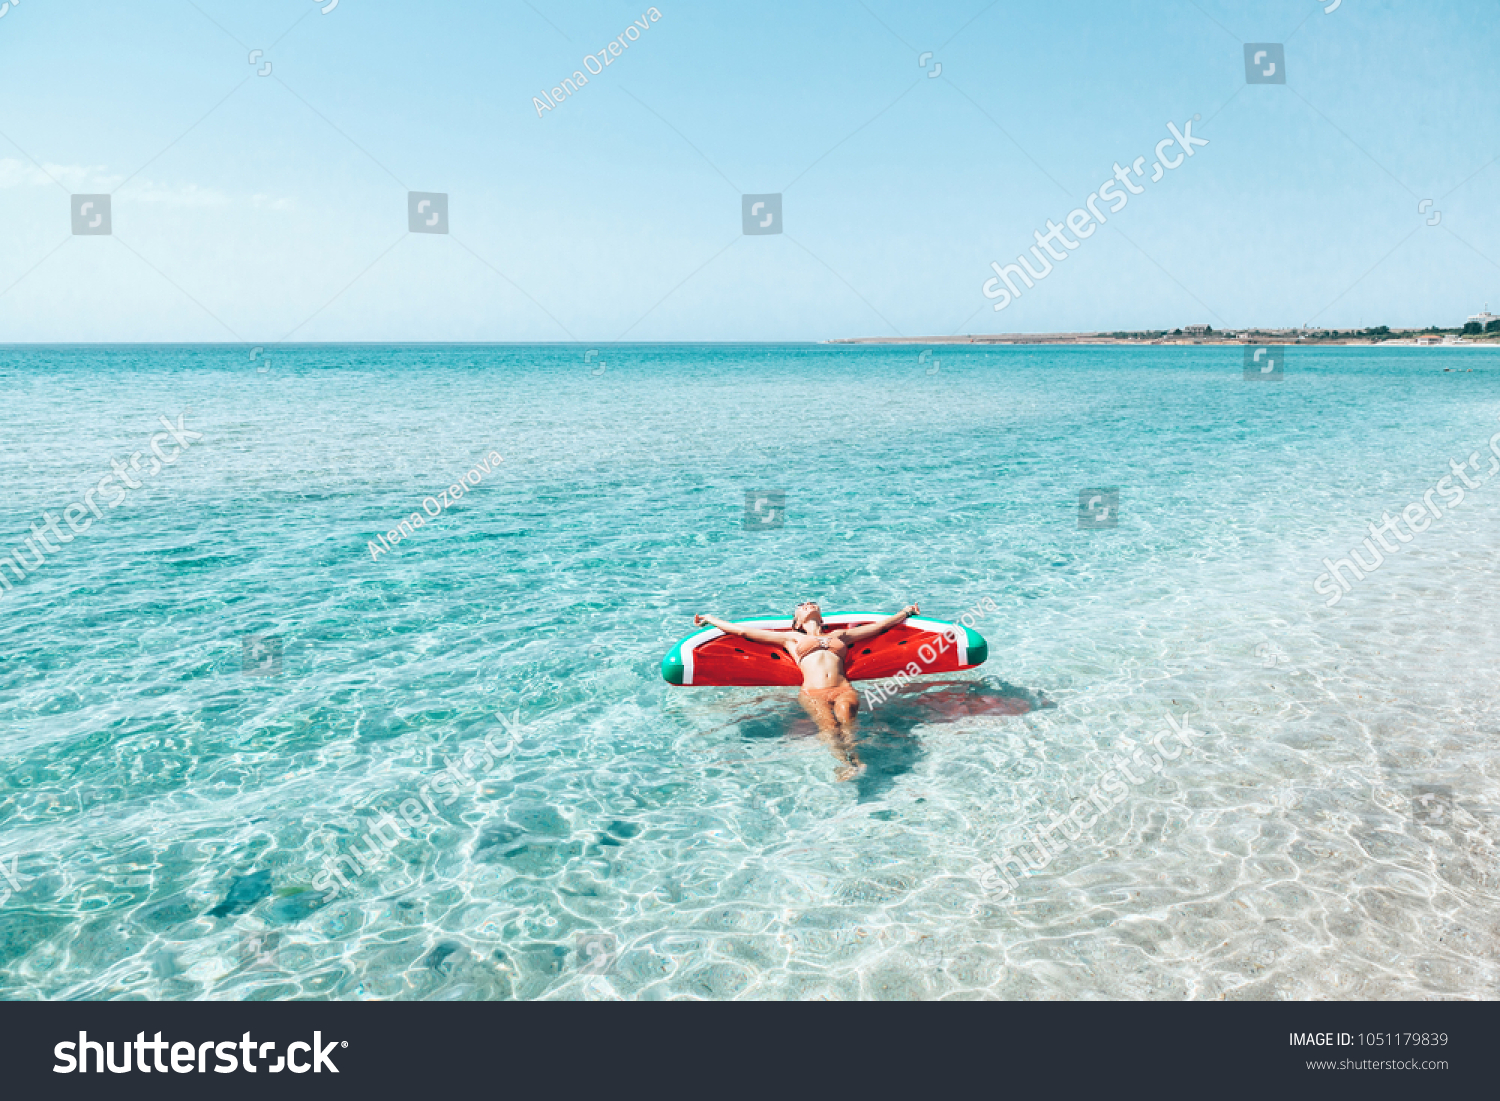 Woman on lilo in the sea water. Girl relaxing on inflatable ring on the beach. Summer vacations, idyllic scene. #1051179839